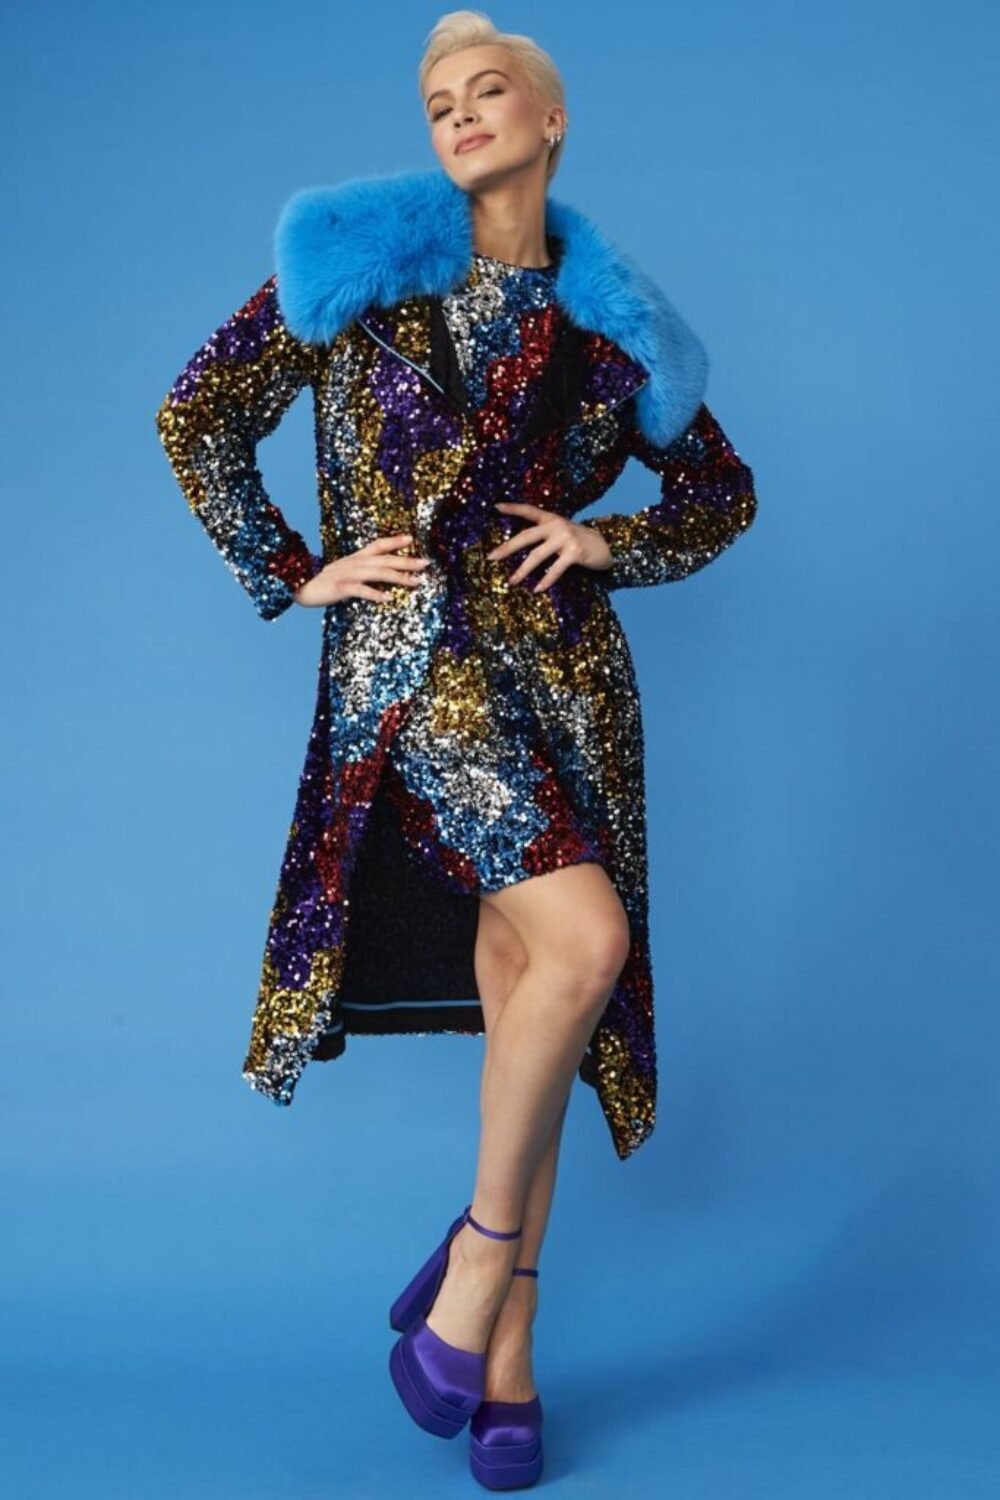 Shop Lux Black Multi Coloured Sequin Trench Coat with Removable Faux Fur Collar and women's luxury and designer clothes at www.lux-apparel.co.uk